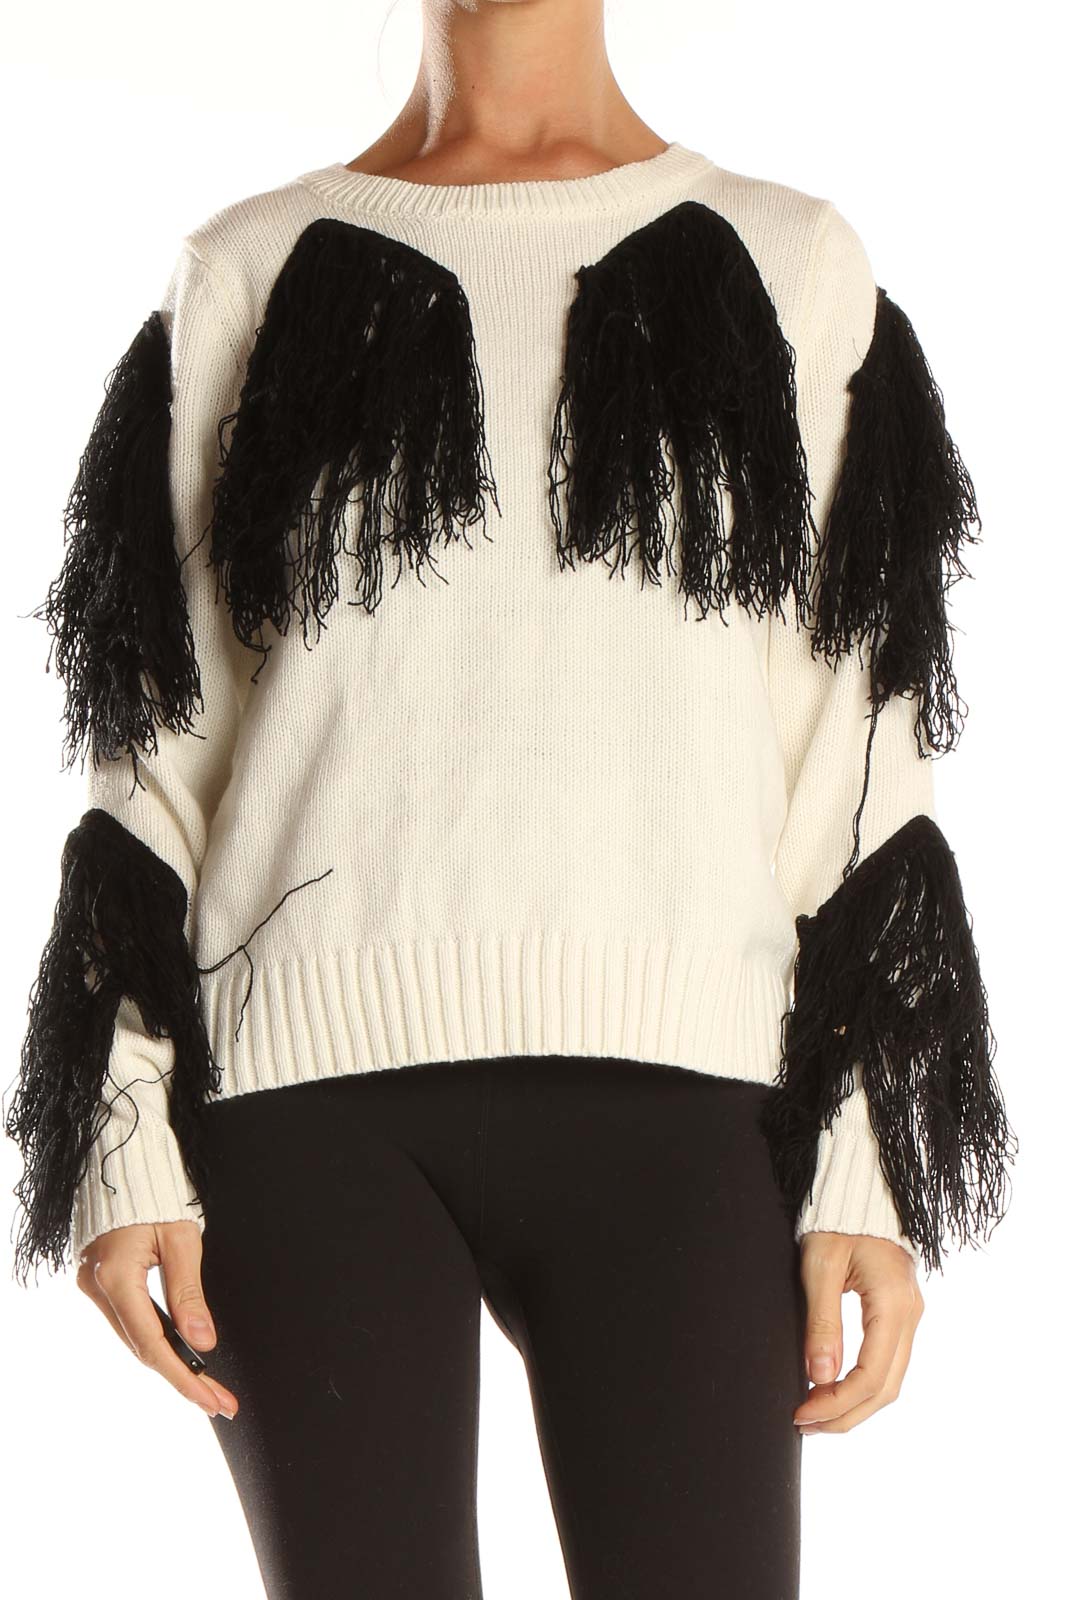 White Chic Sweater With Black Fringe Detail Front